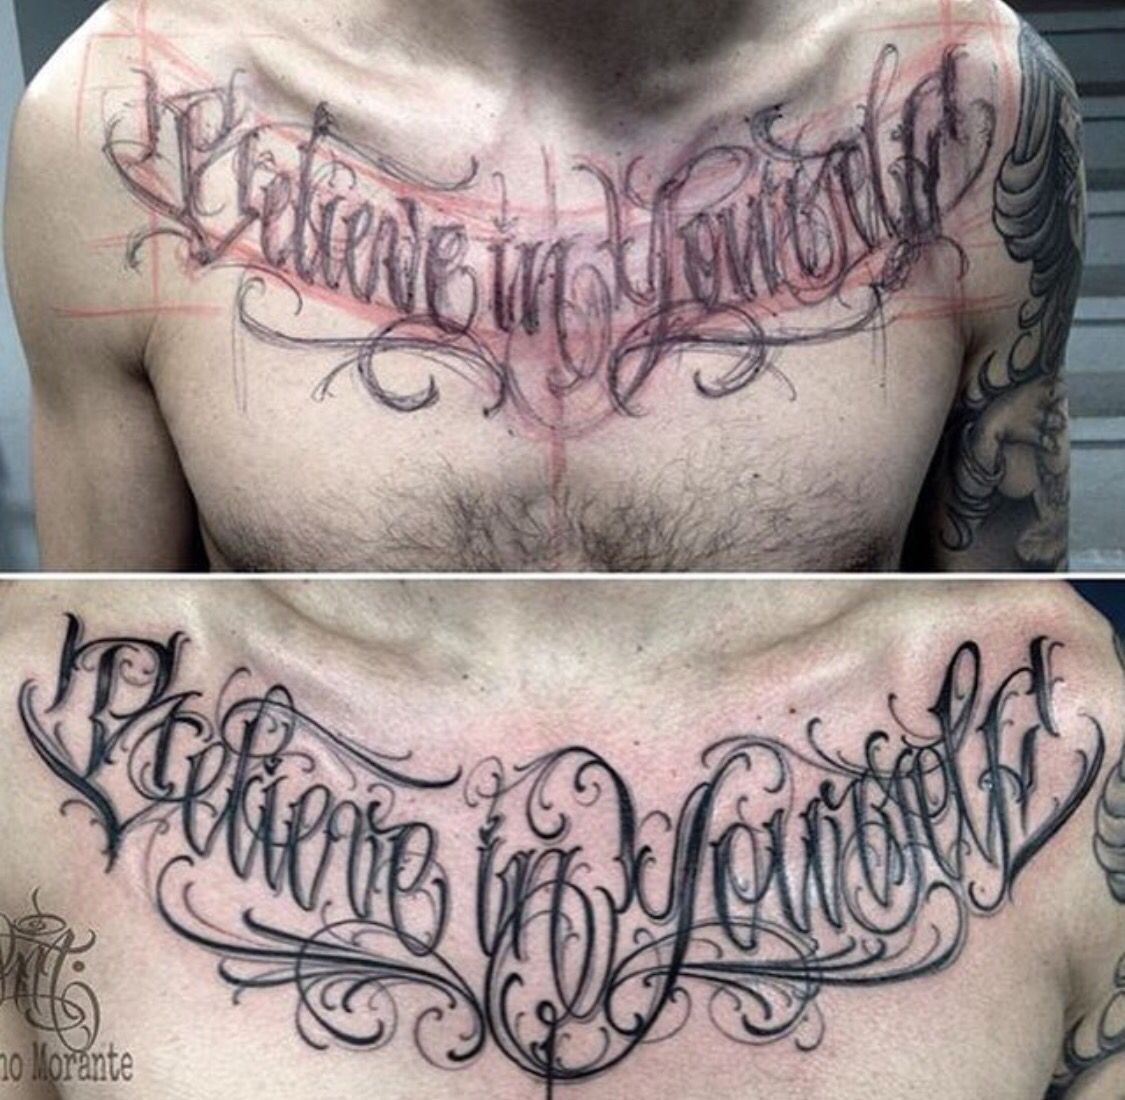 Believe In Yourself Chest Lettering Tattoo Tattoo Envy Tatuagem for dimensions 1125 X 1100